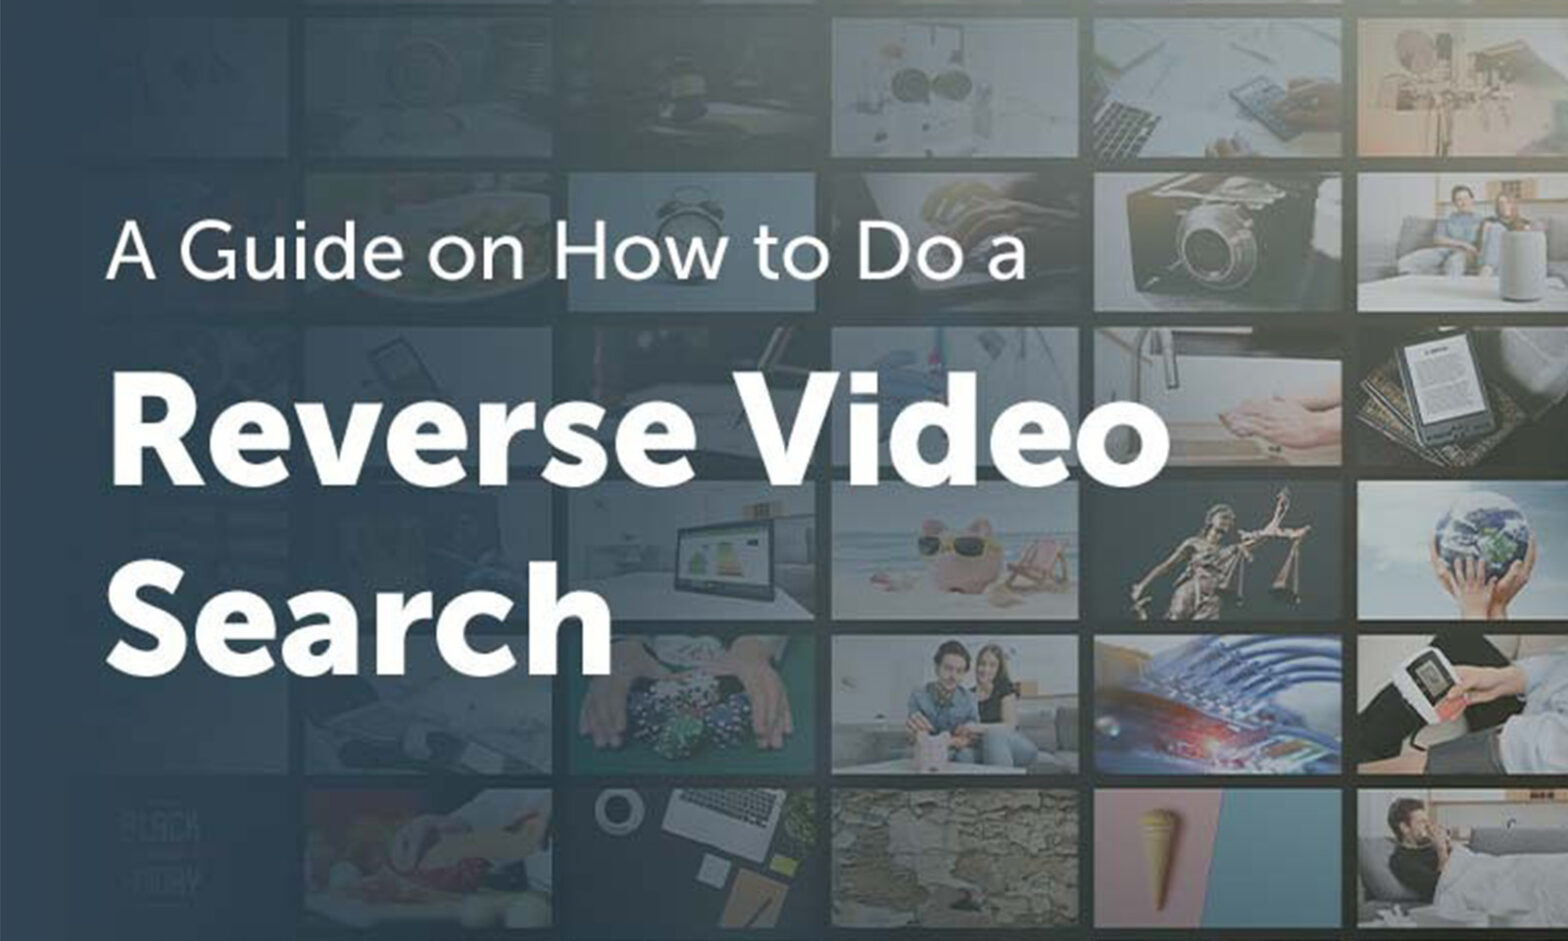 Featured image for post: A Guide on How to Do a Reverse Video Search